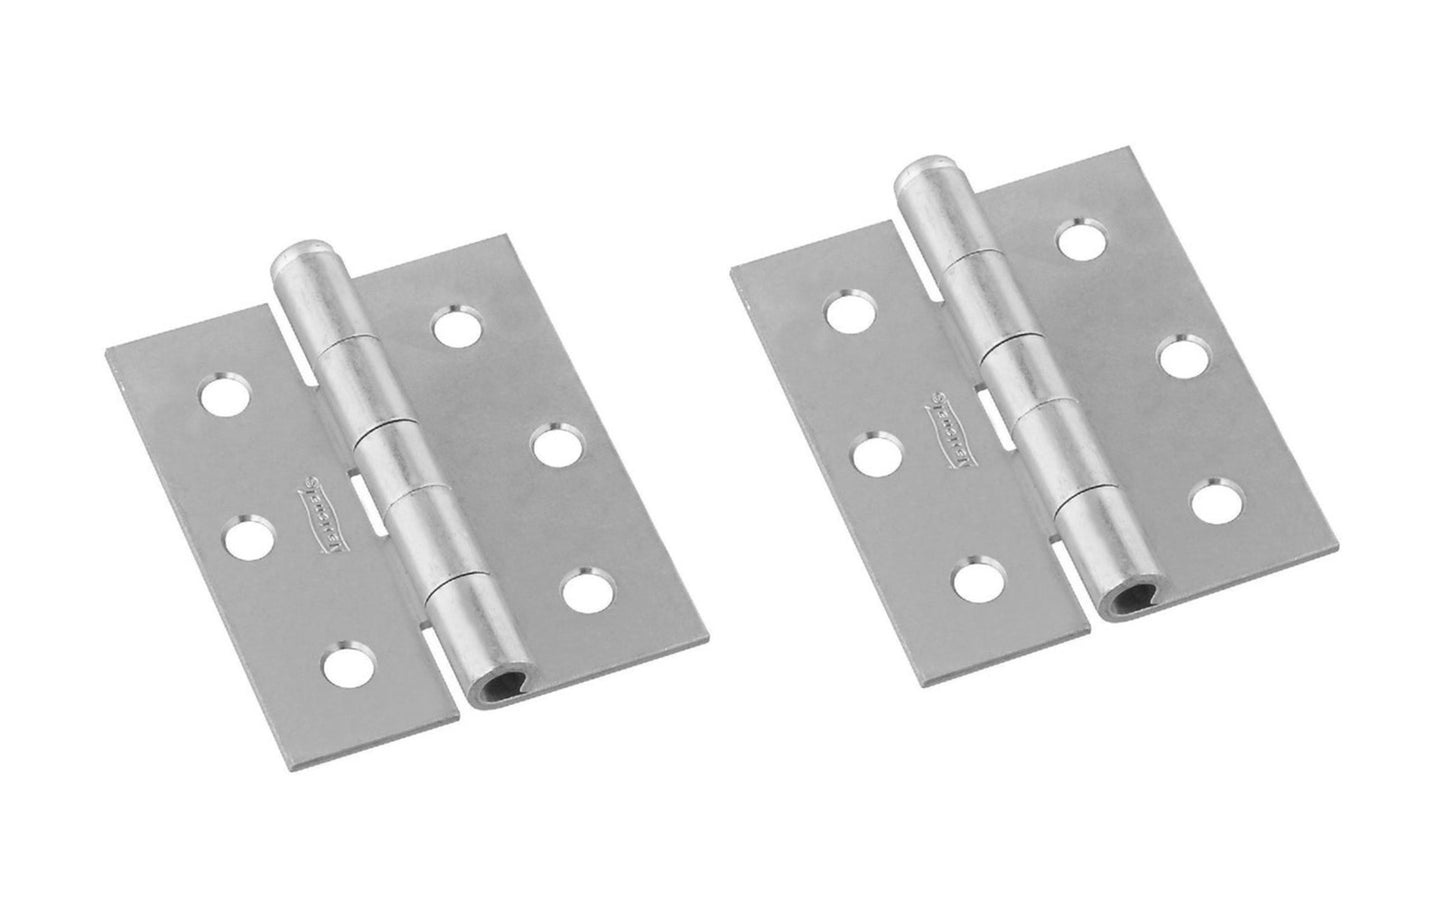 3" Zinc-Plated Screen / Storm Door Hinges sold in a 2 pack. Button tip, loose pin, un-swaged, reversible hinge. Use full-surface, half-surface, half-mortise or for offset where door & jamb are not flush. Screw holes countersunk on both sides of each leaf. Size: 3" x 2-1/2". Includes flat head screws. National Hardware Model No. N115-519.